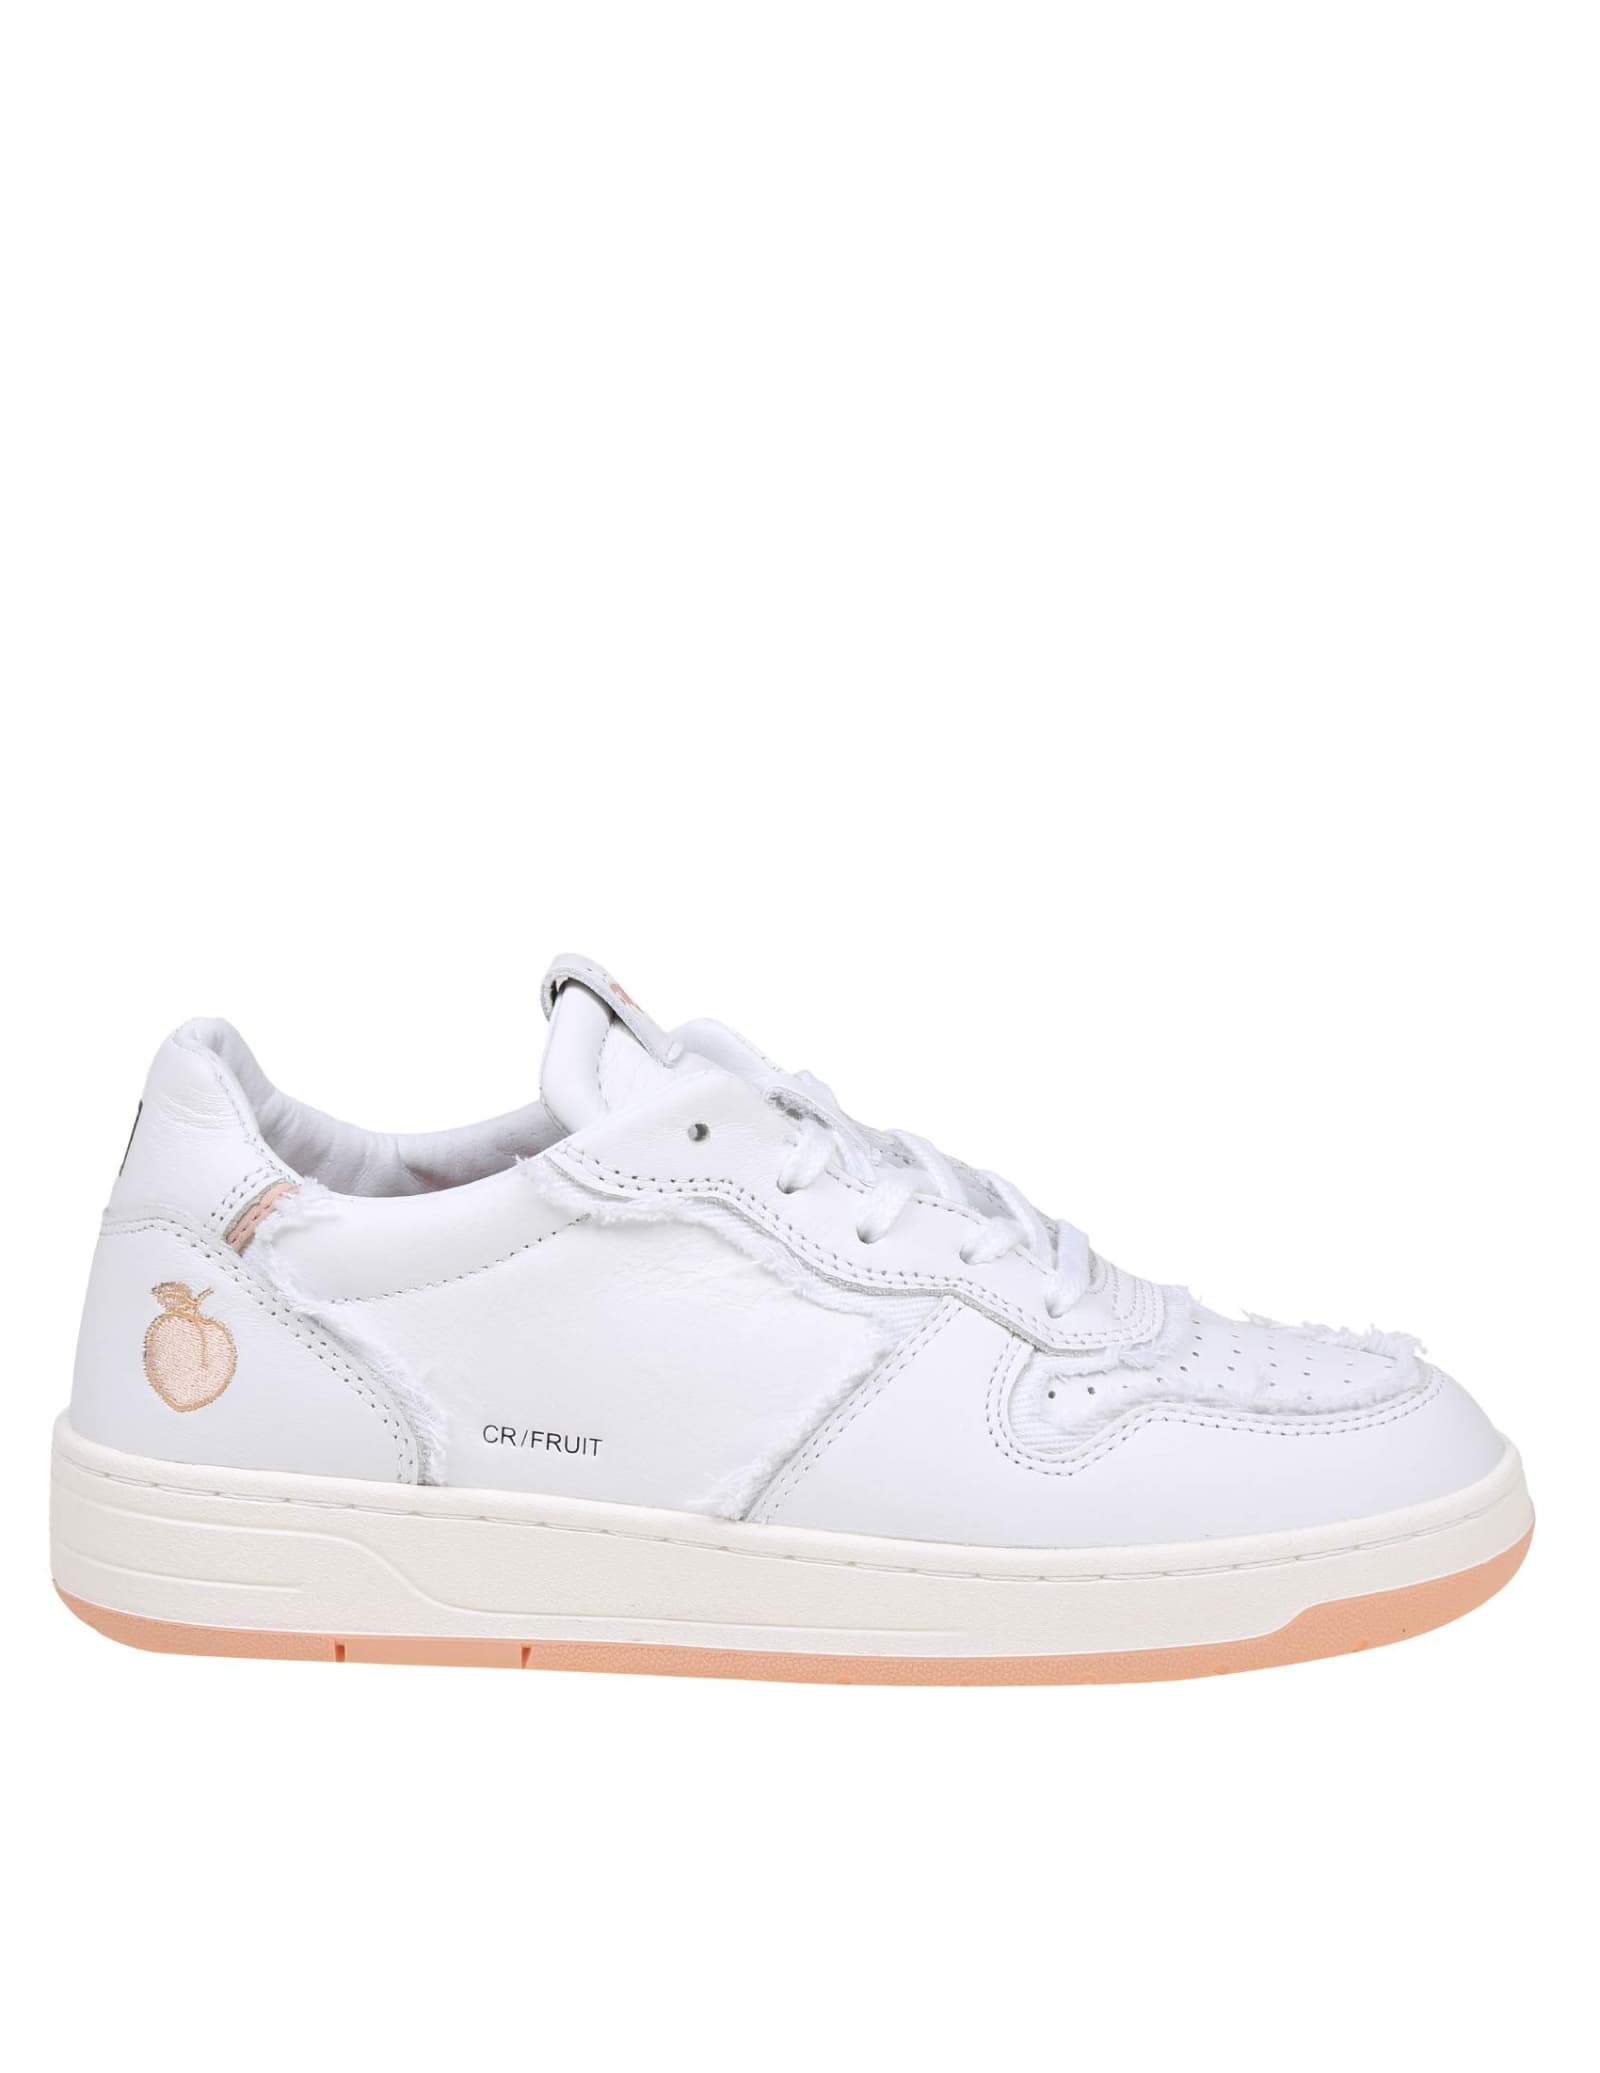 Shop Date Court Sneakers In White Leather In Peach